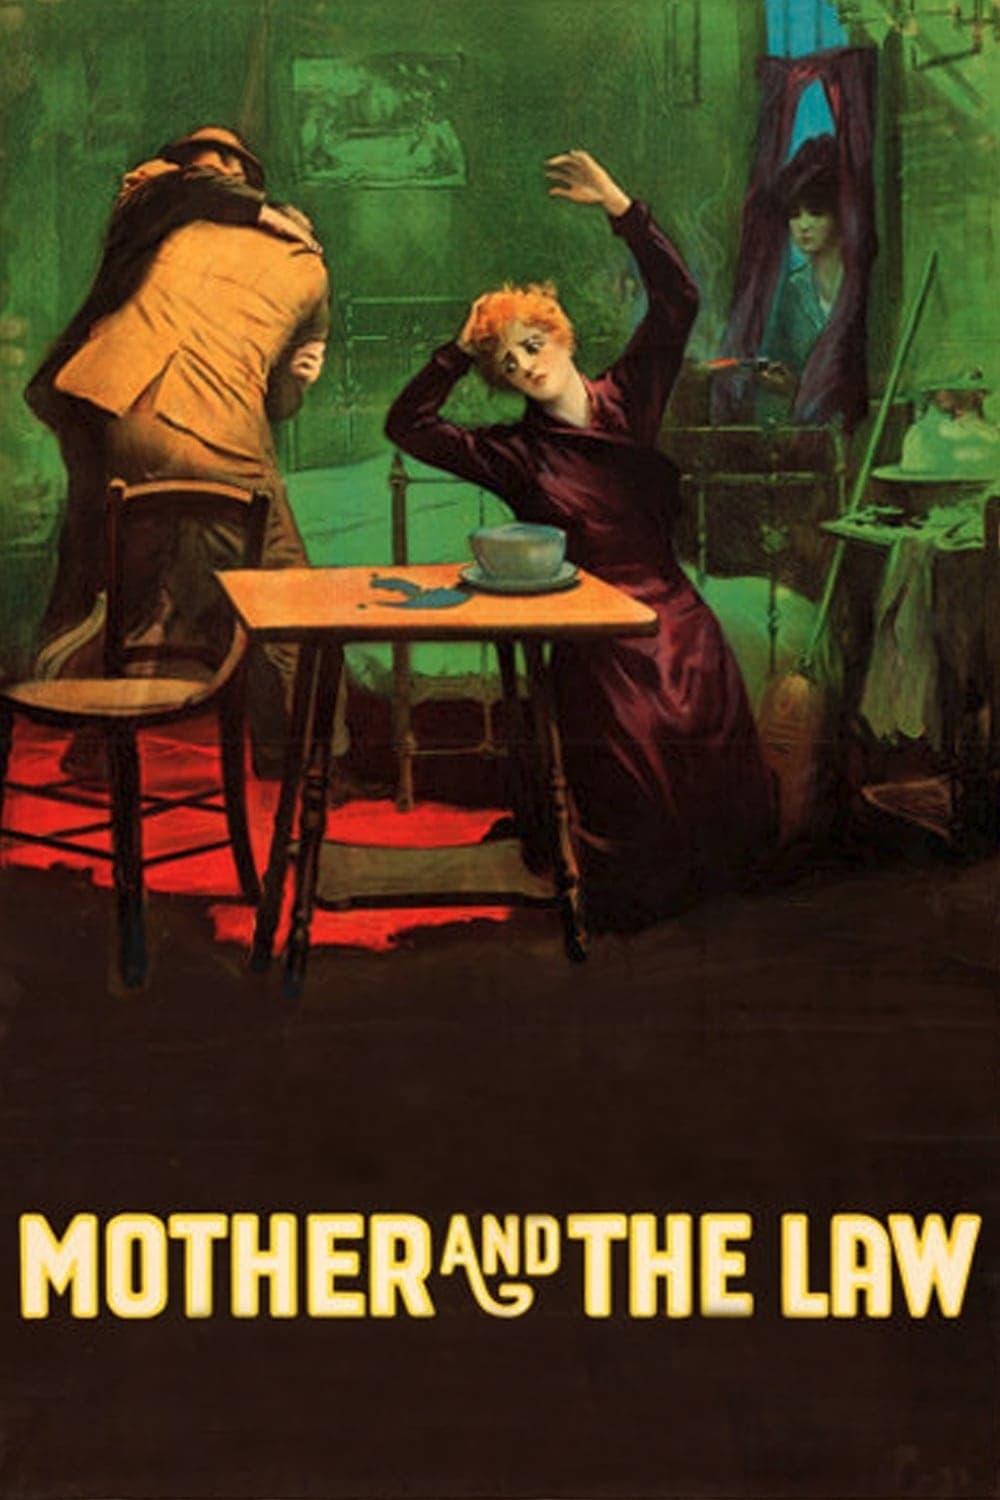 The Mother and the Law poster